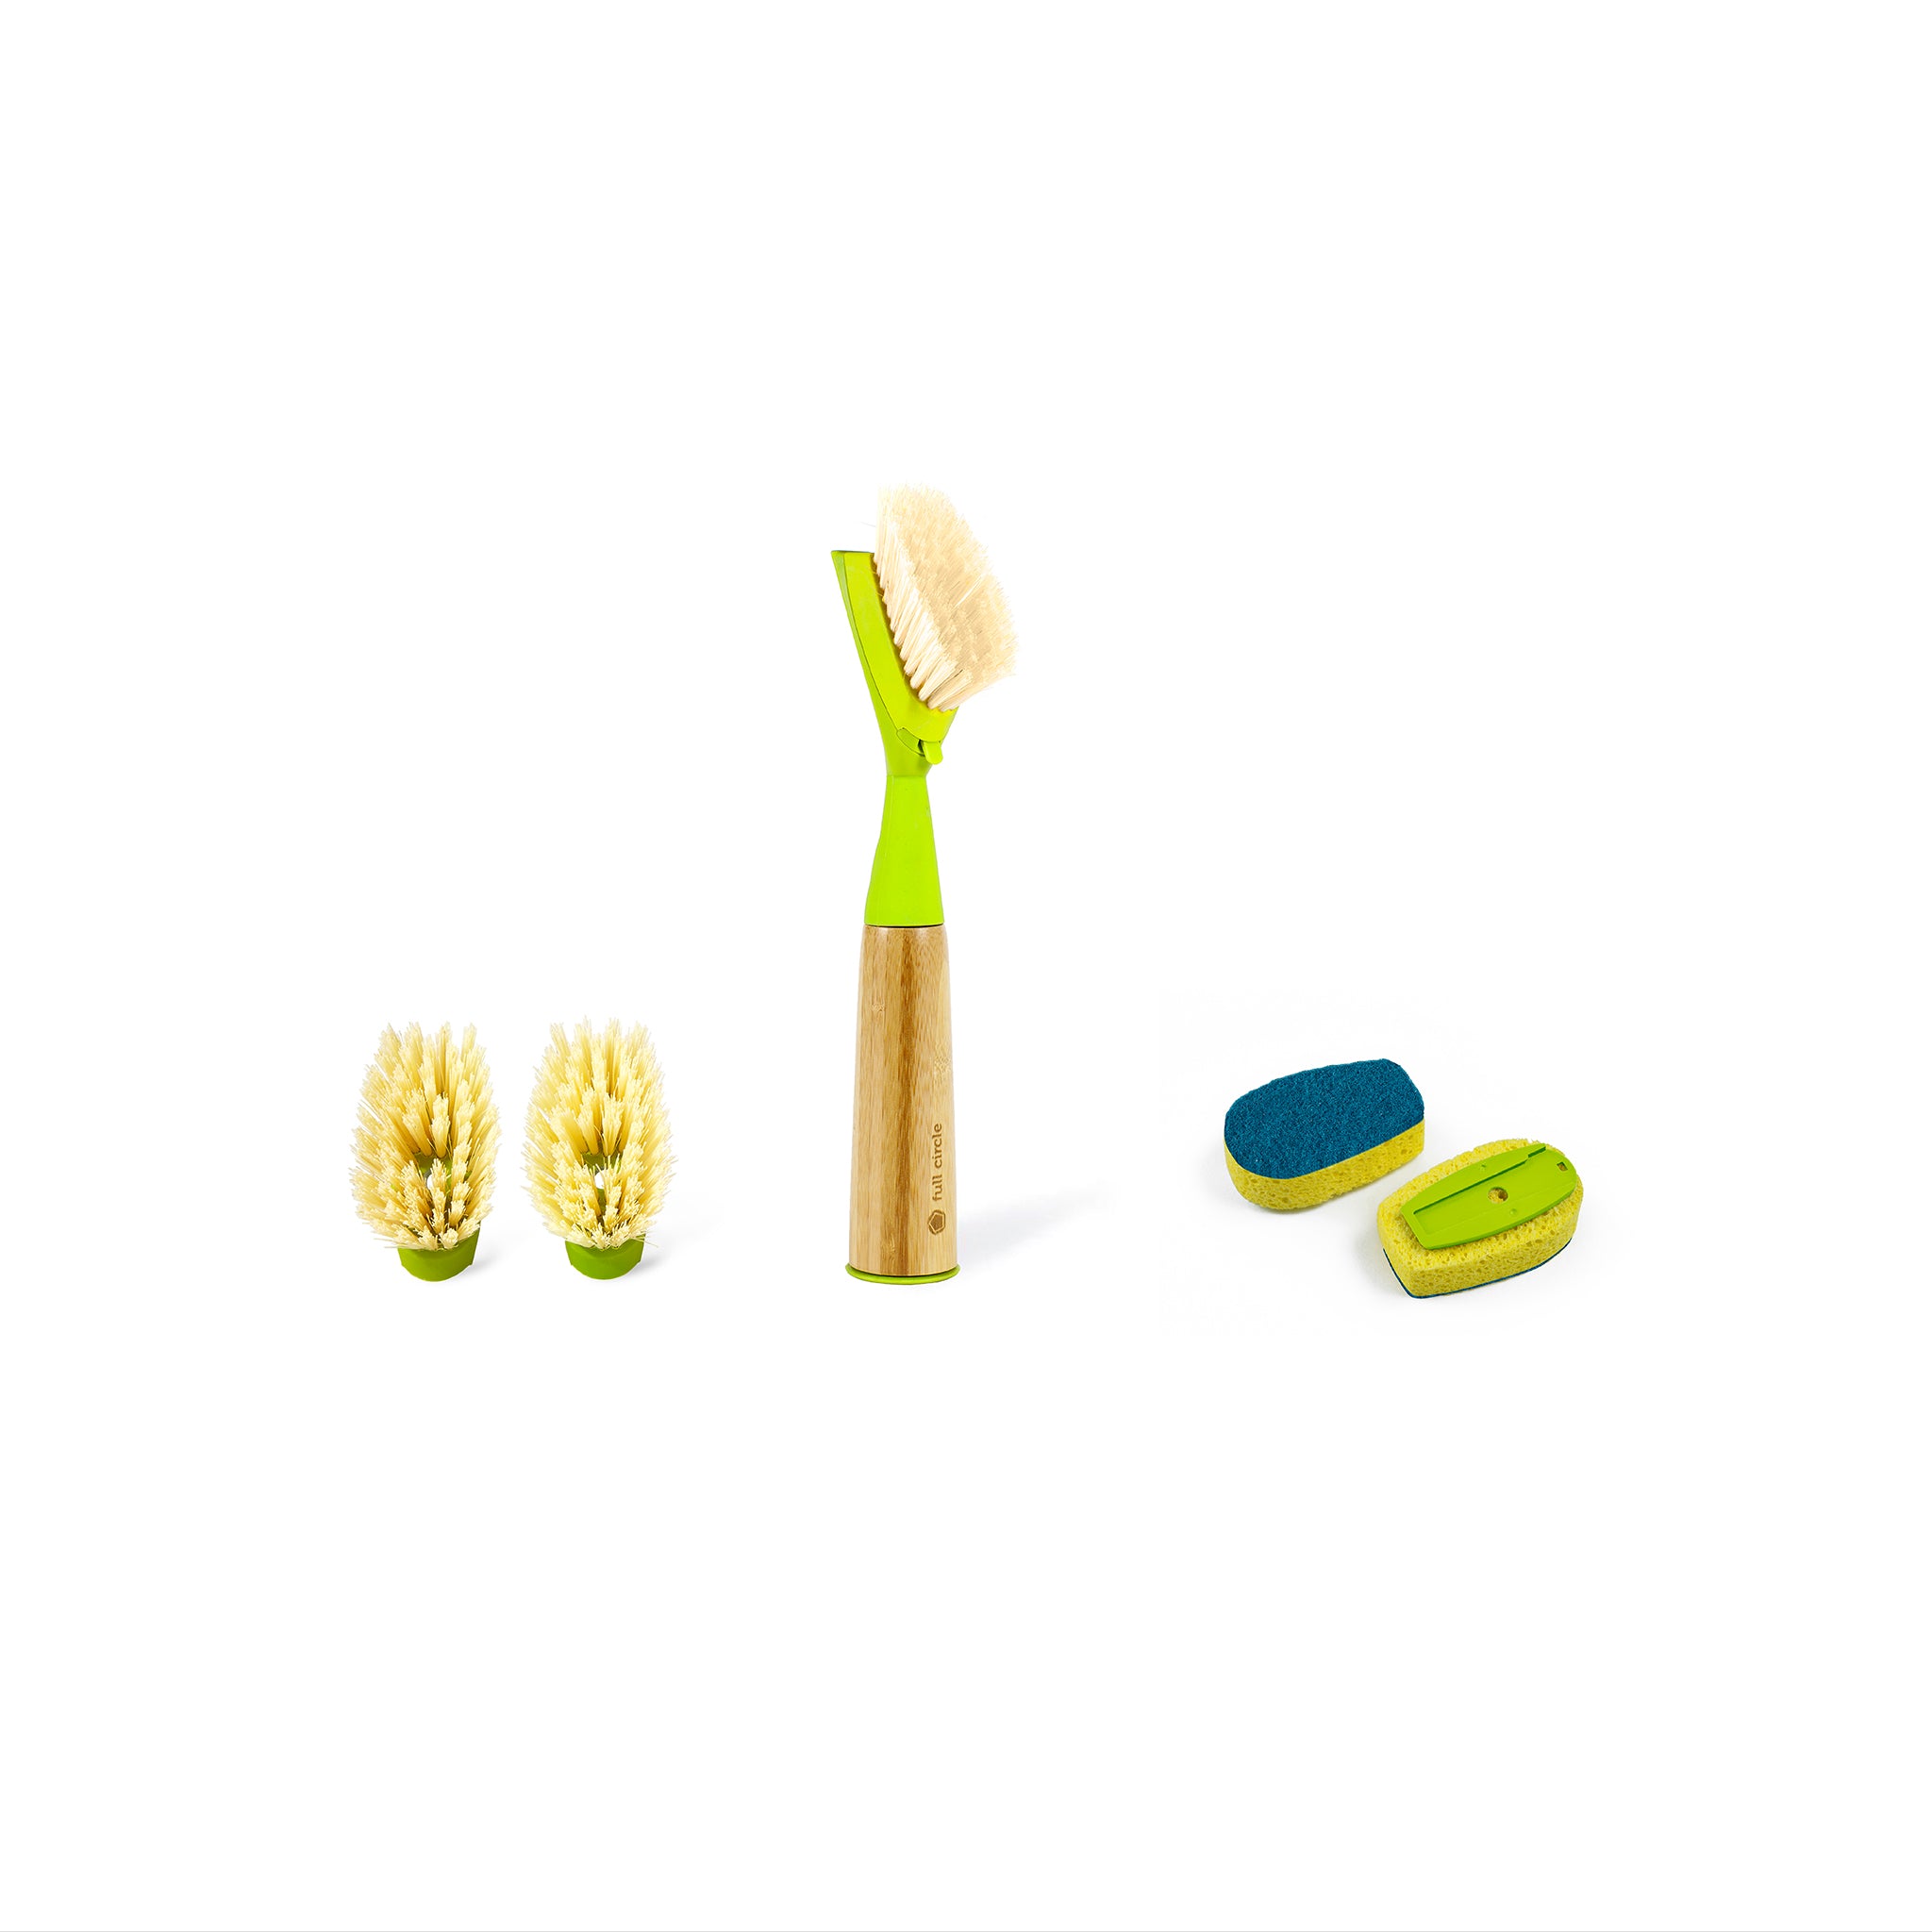 Soap Dispensing Dish Brush, Kitchen Hand Brush For Cleaning Dishes